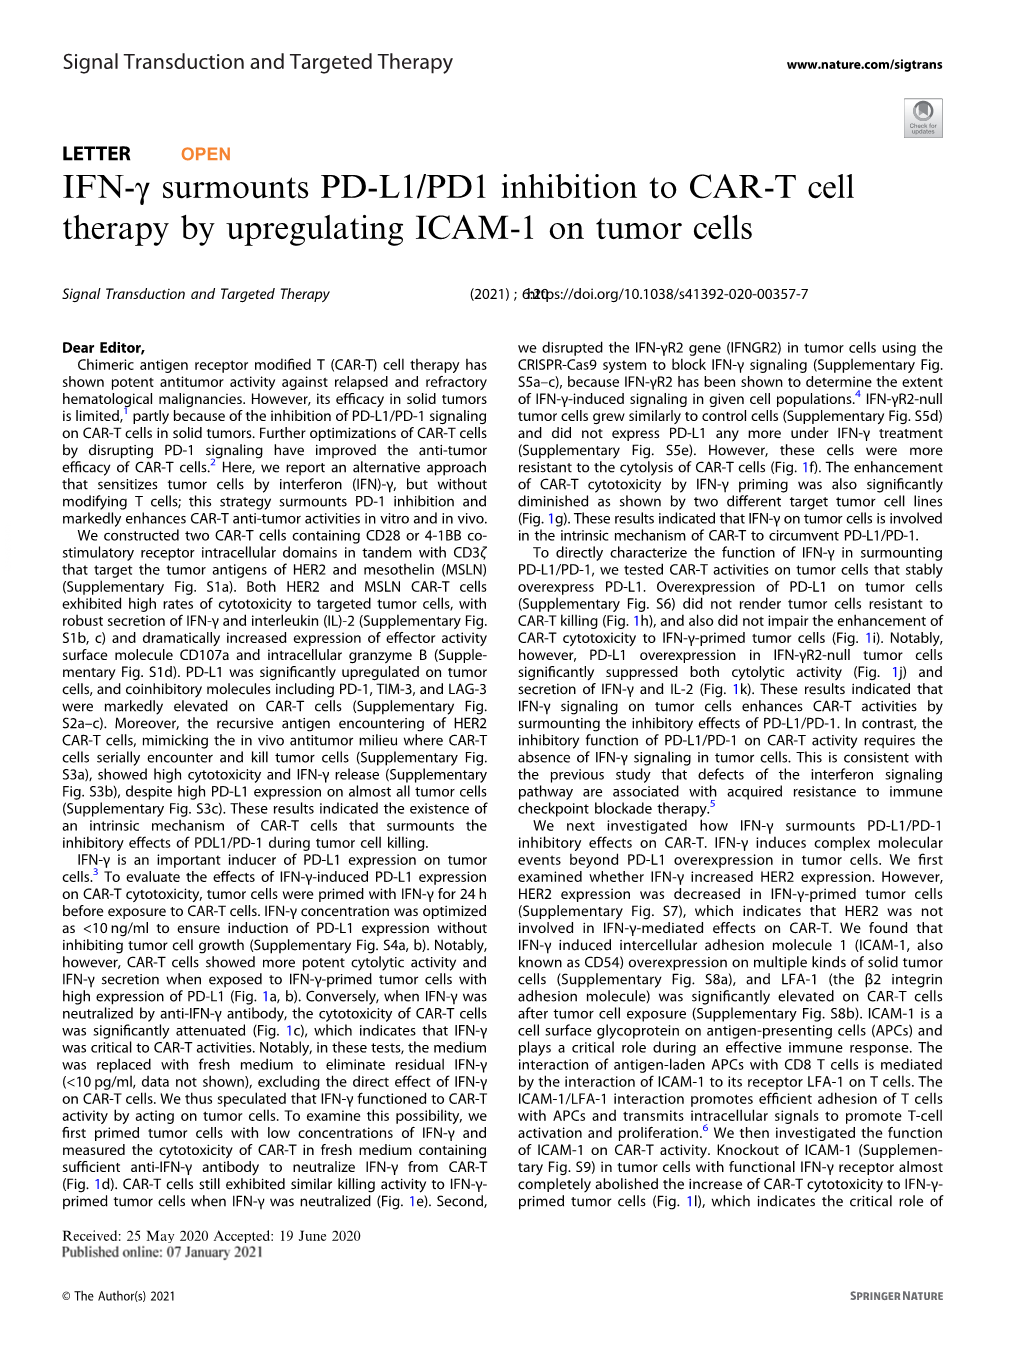 IFN-Γ Surmounts PD-L1/PD1 Inhibition to CAR-T Cell Therapy by Upregulating ICAM-1 on Tumor Cells